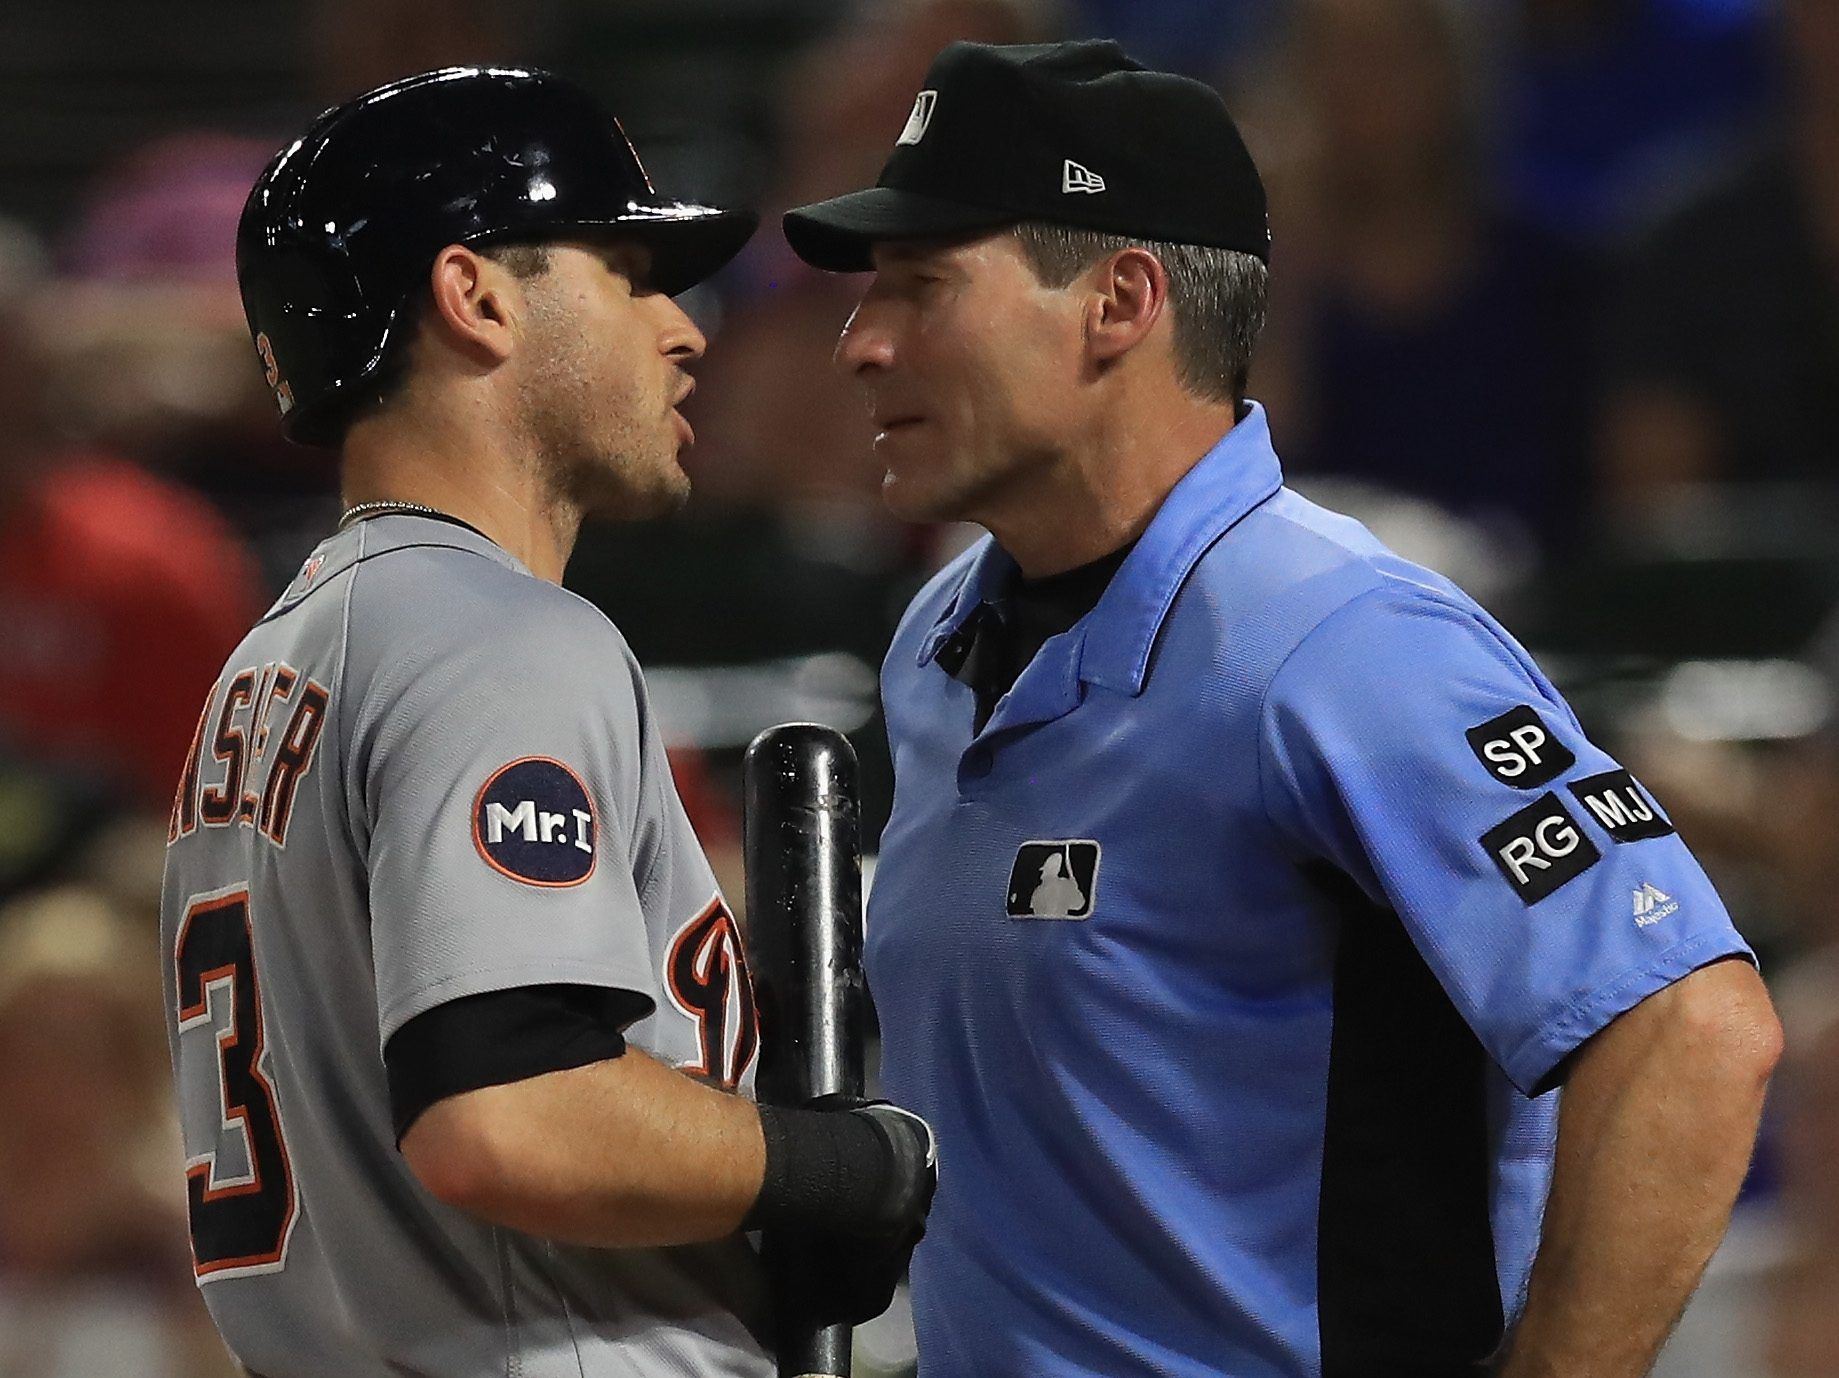 Where in the world is controversial MLB umpire Angel Hernandez